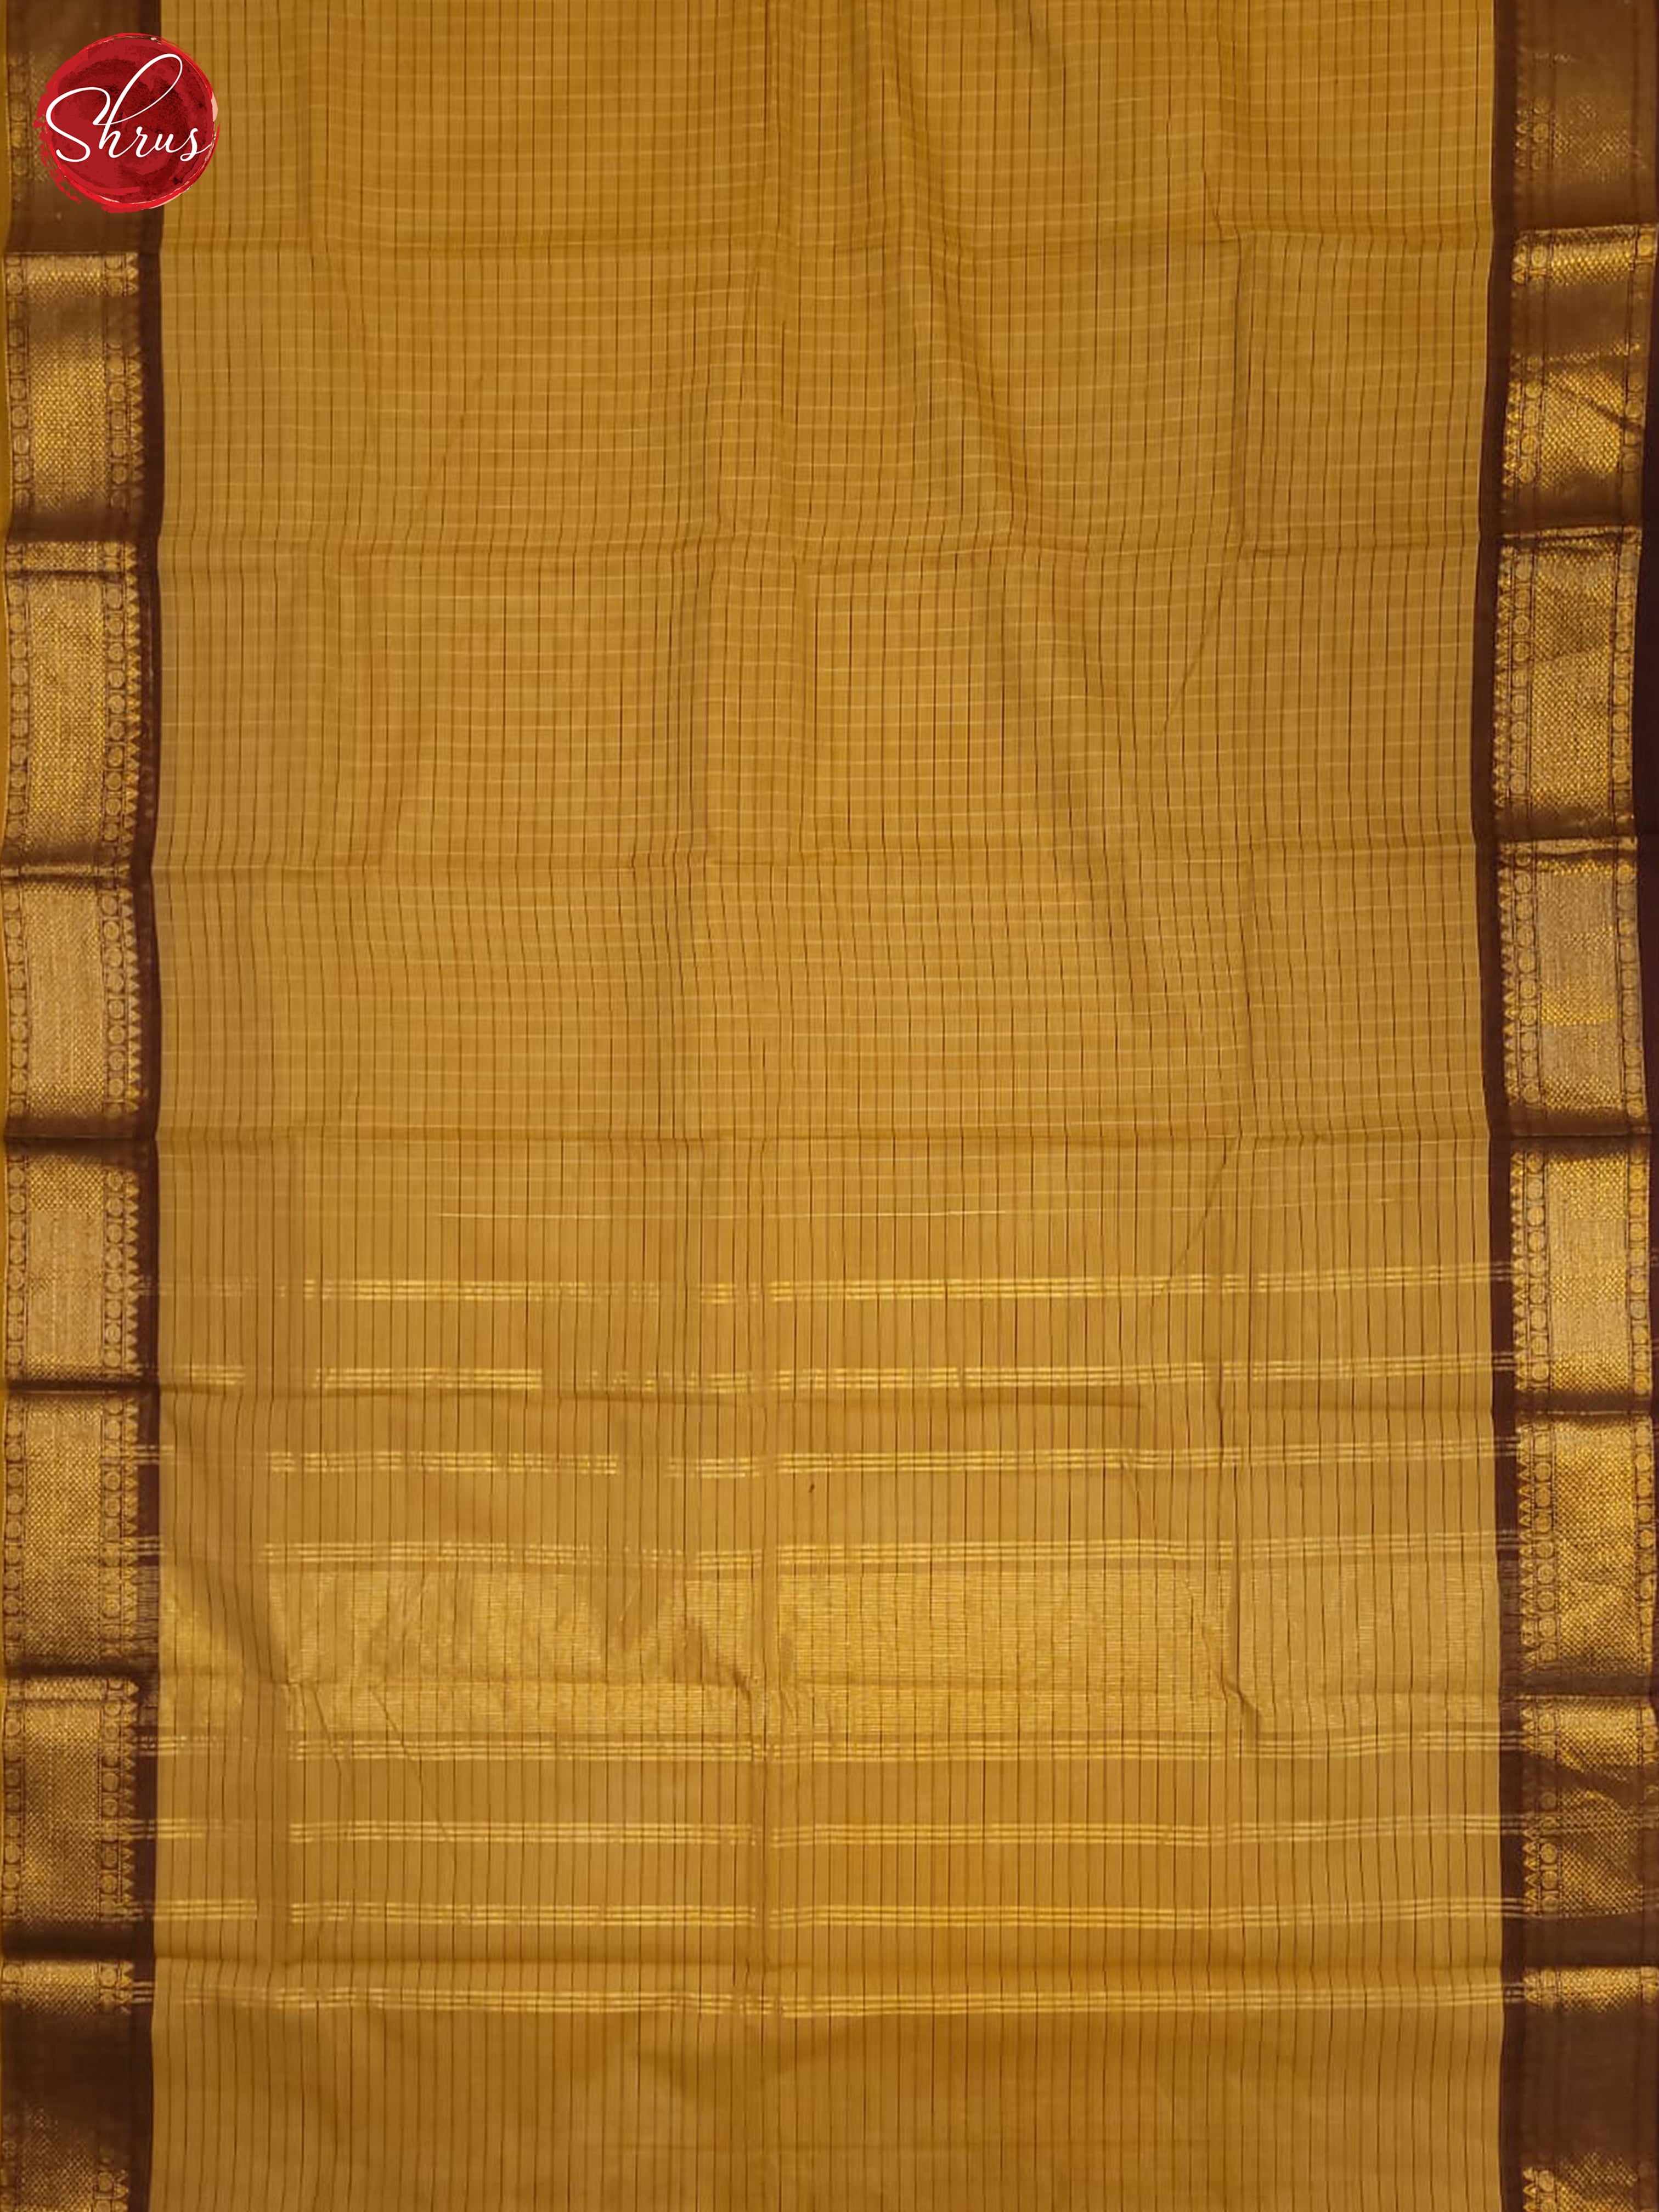 Biscuit & Brown - Chettinad Cotton Saree - Shop on ShrusEternity.com